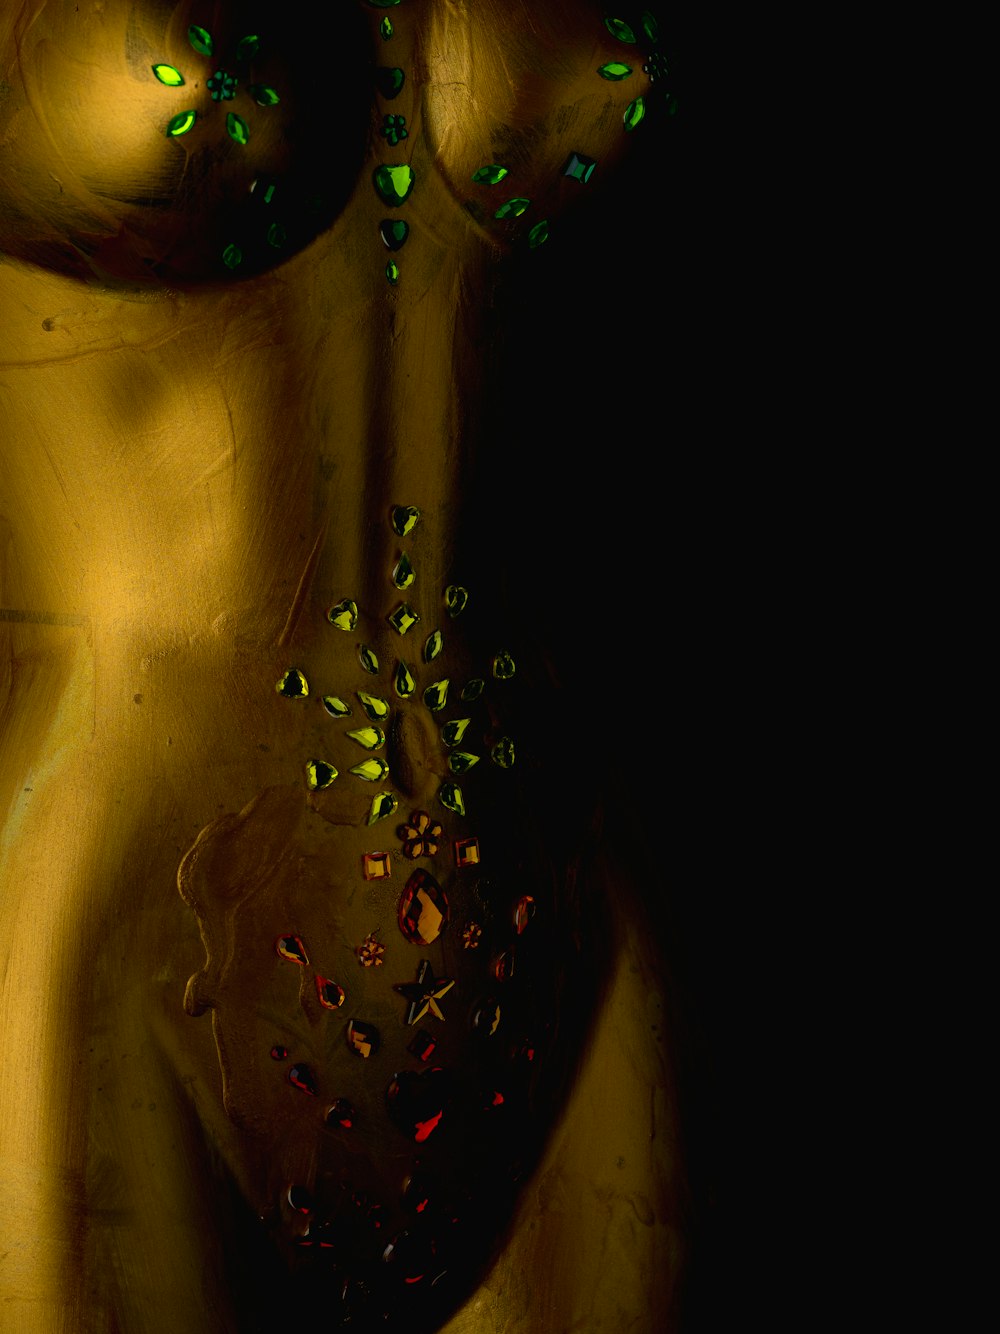 a close up of a gold colored object with green lights